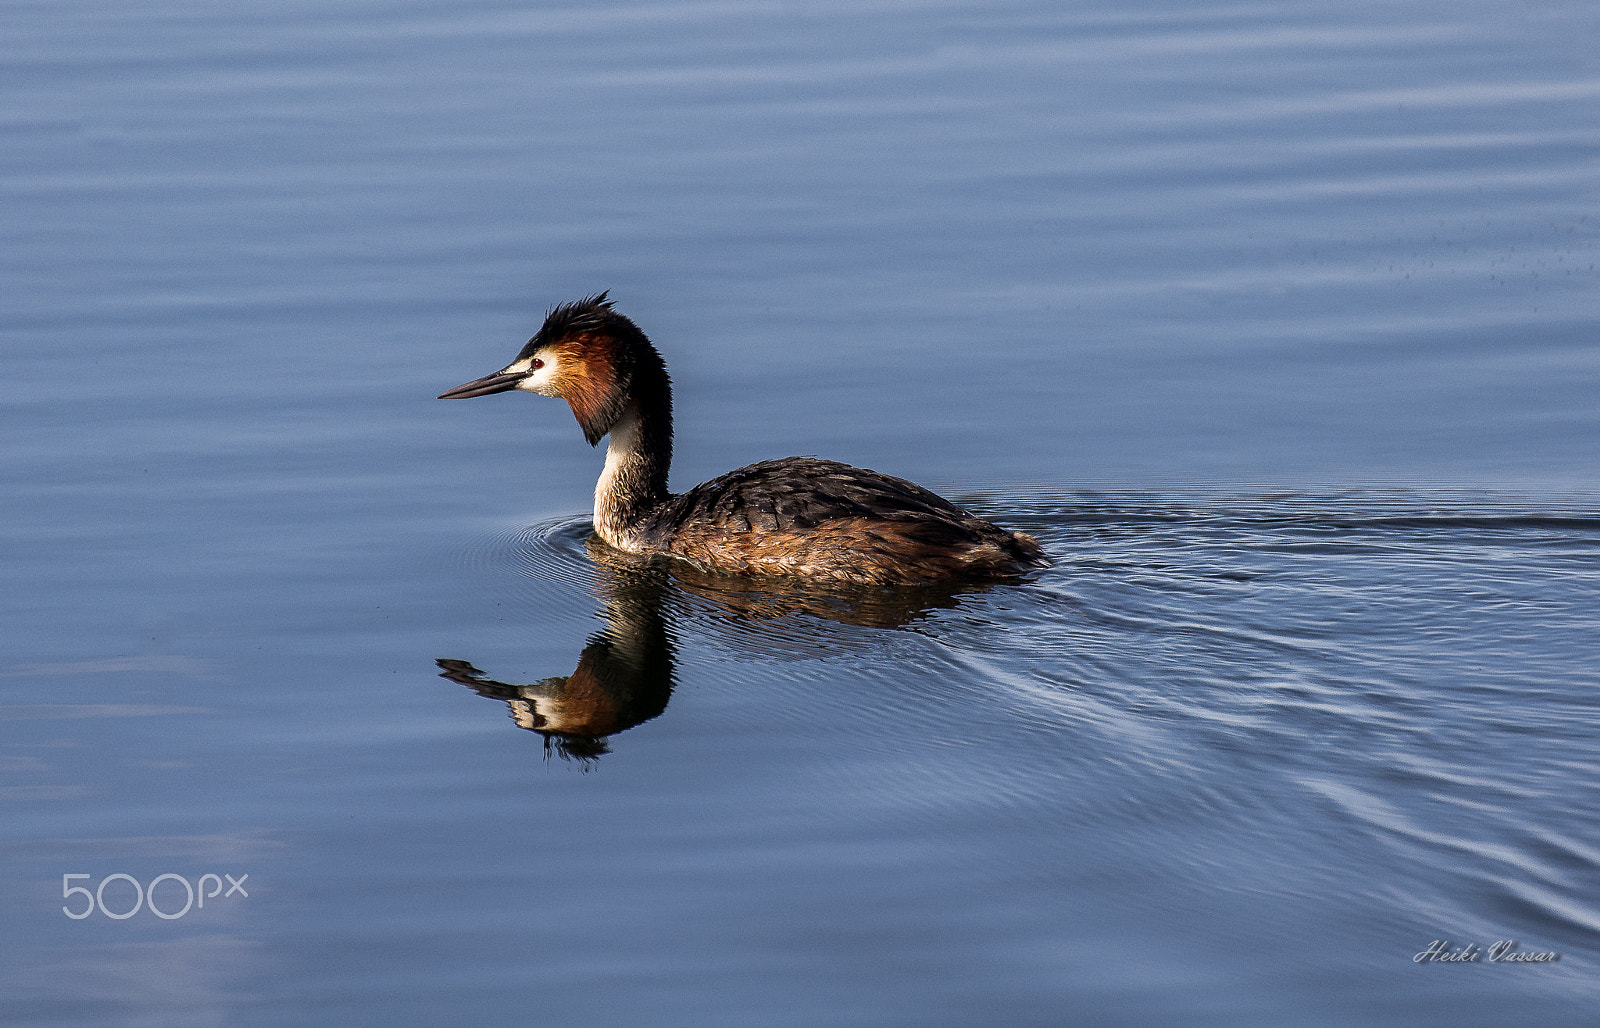 Pentax K-r + Sigma 70-300mm F4-5.6 DG OS sample photo. Great crested grebe (podiceps cristatus) photography